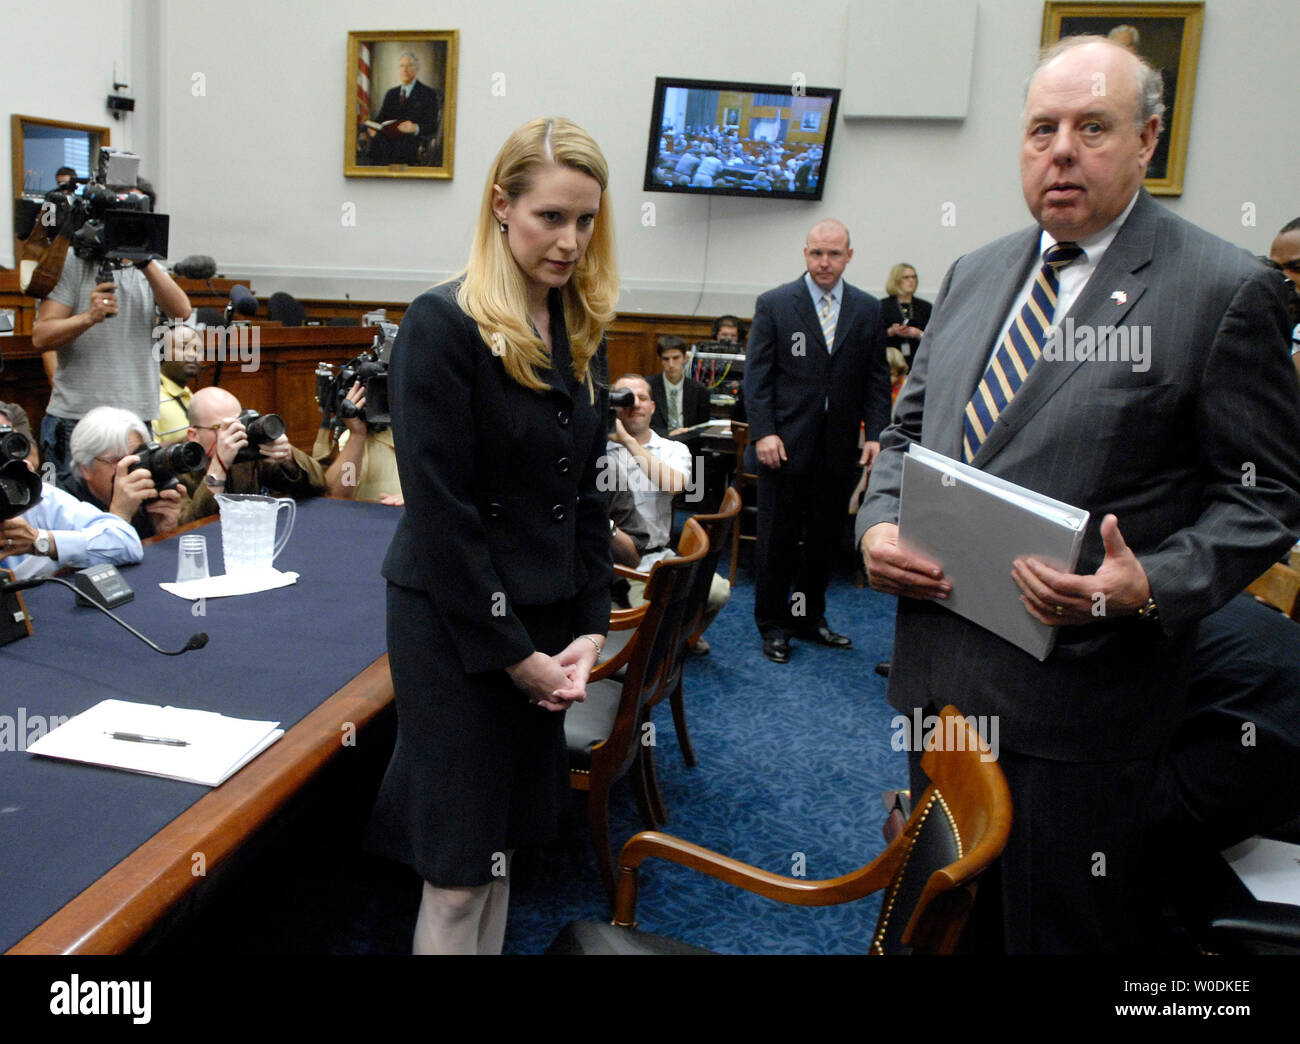 Monica Goodling, former Justice Department White House Liaison, stans with her her attorney John M.Dowd (R) prior to testifying before a House Judiciary Committee hearing on the firings of U.S. Attorneys, on Capitol Hill in Washington on May 23, 2007. (UPI Photo/Kevin Dietsch) Stock Photo